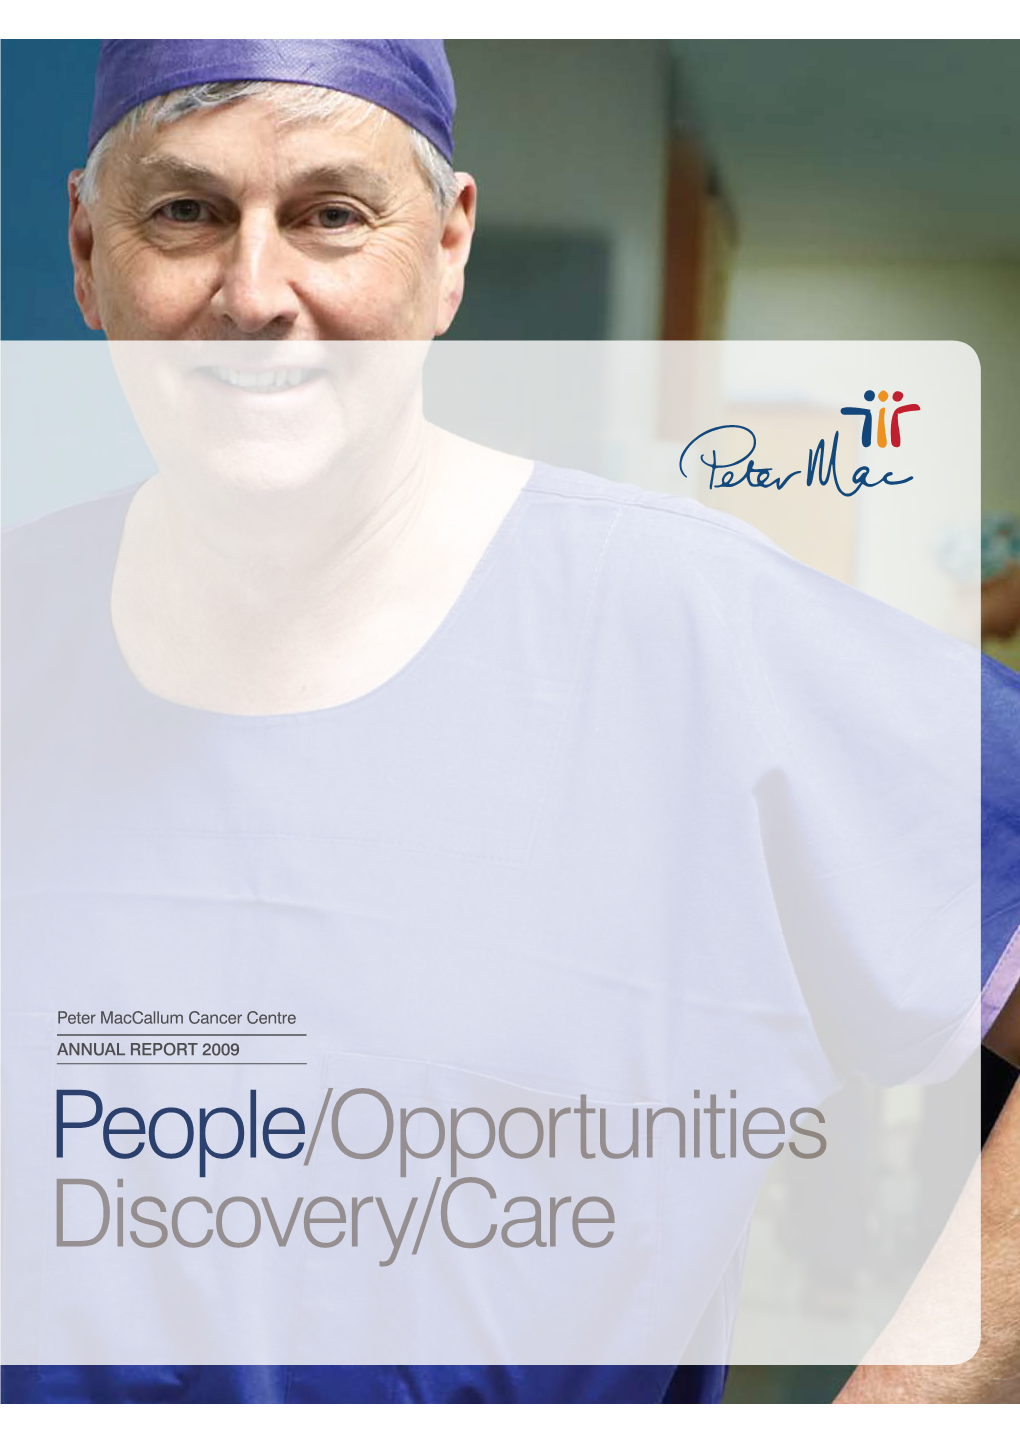 People/Opportunities Discovery/Care